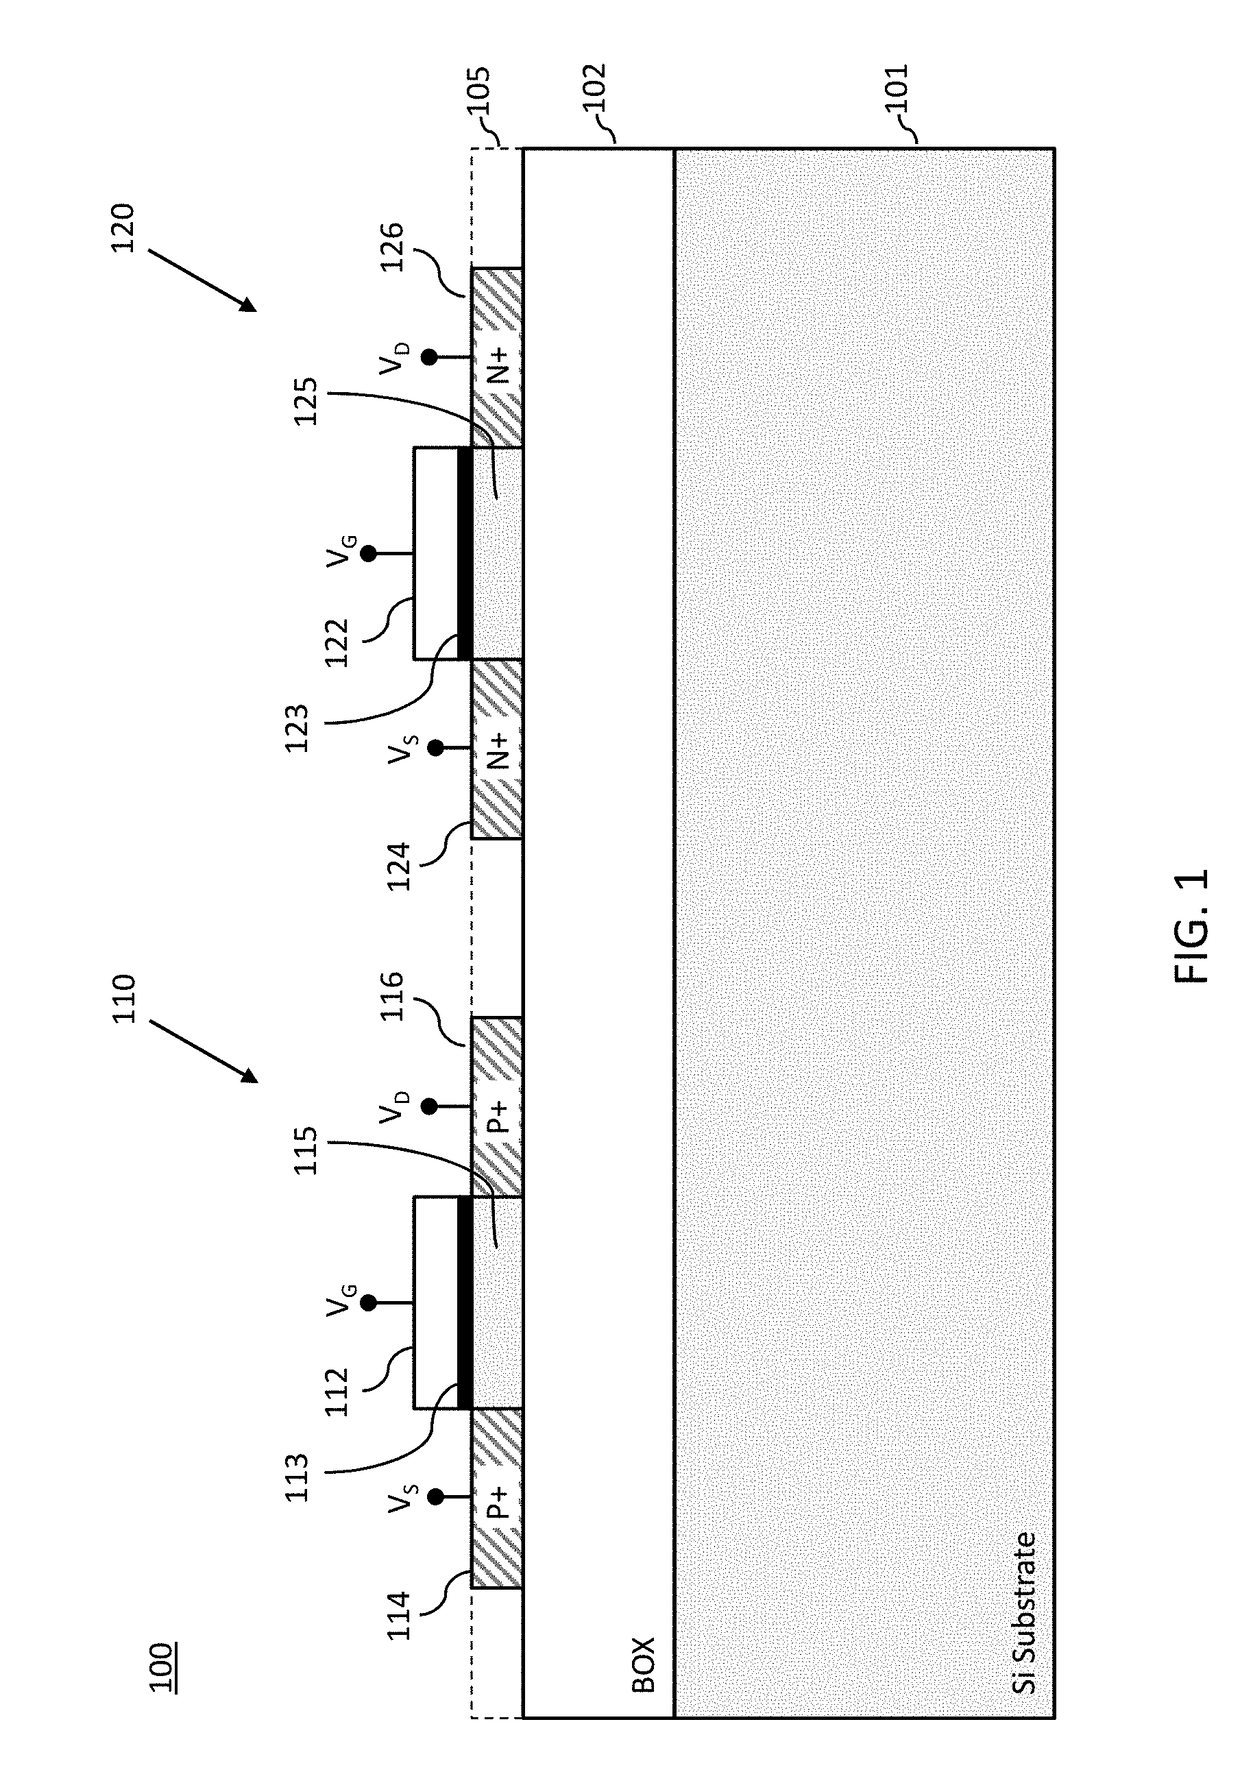 Systems, Methods and Apparatus for Enabling High Voltage Circuits